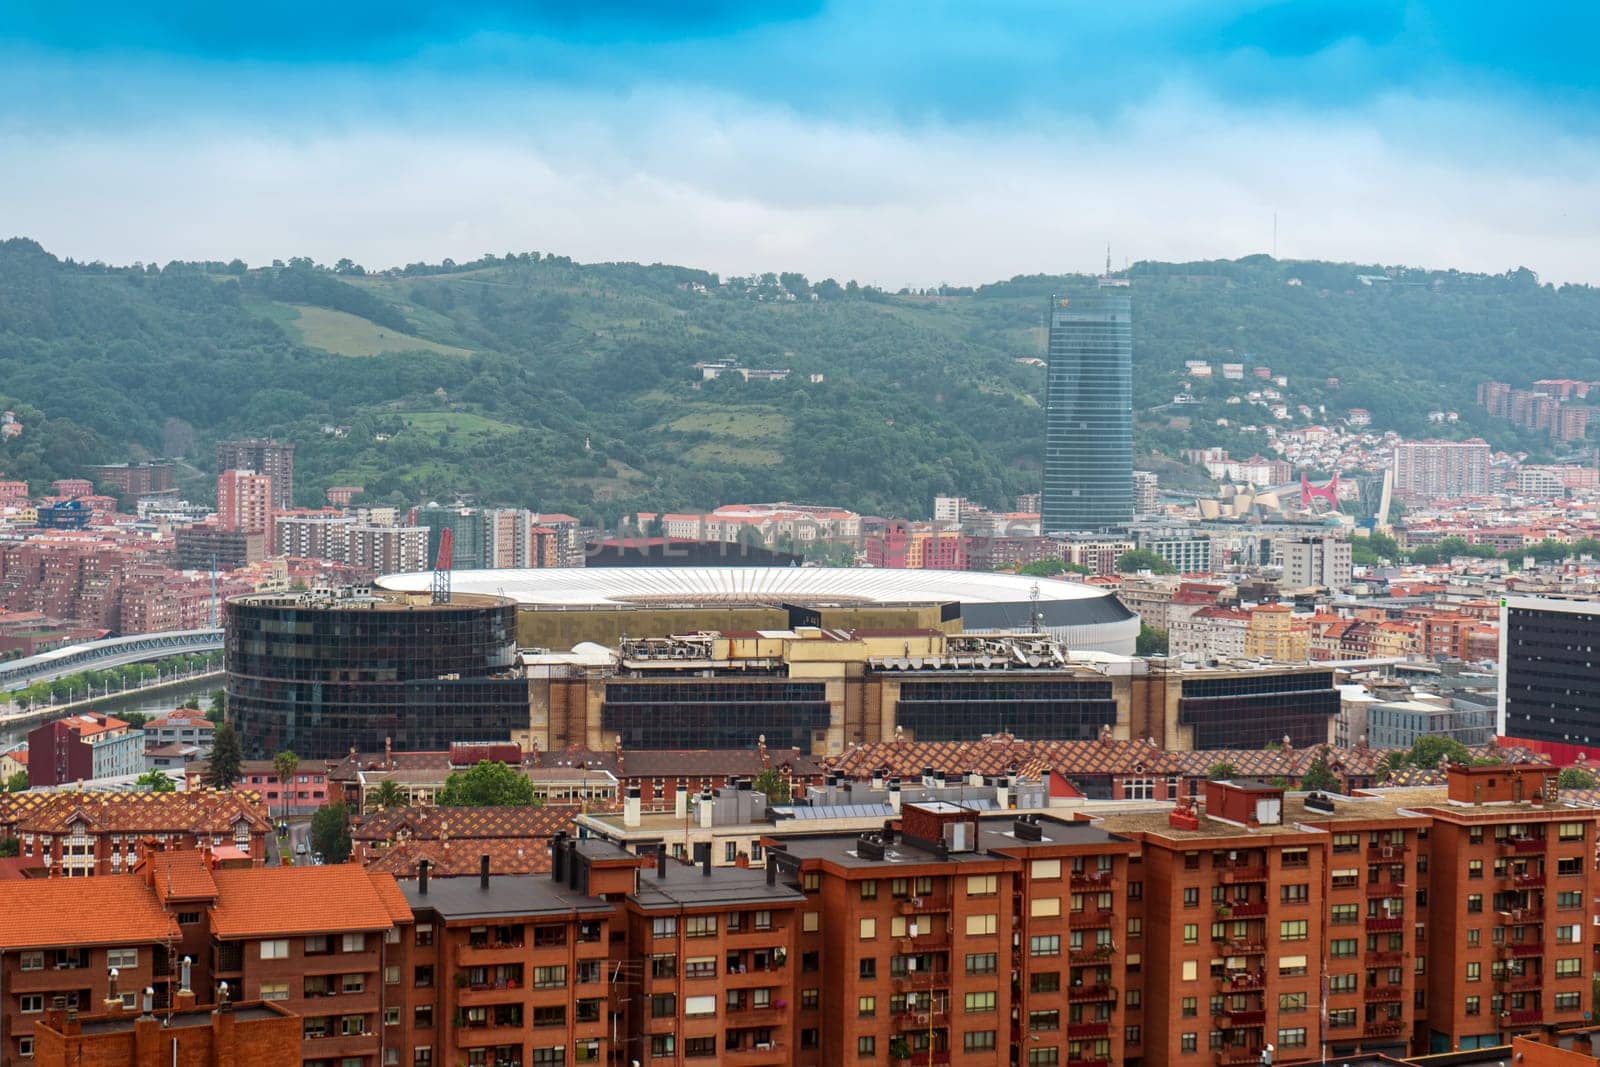 Panorama of the city of Bilbao, view of the San Mames Stadium, Basque Country, Spain